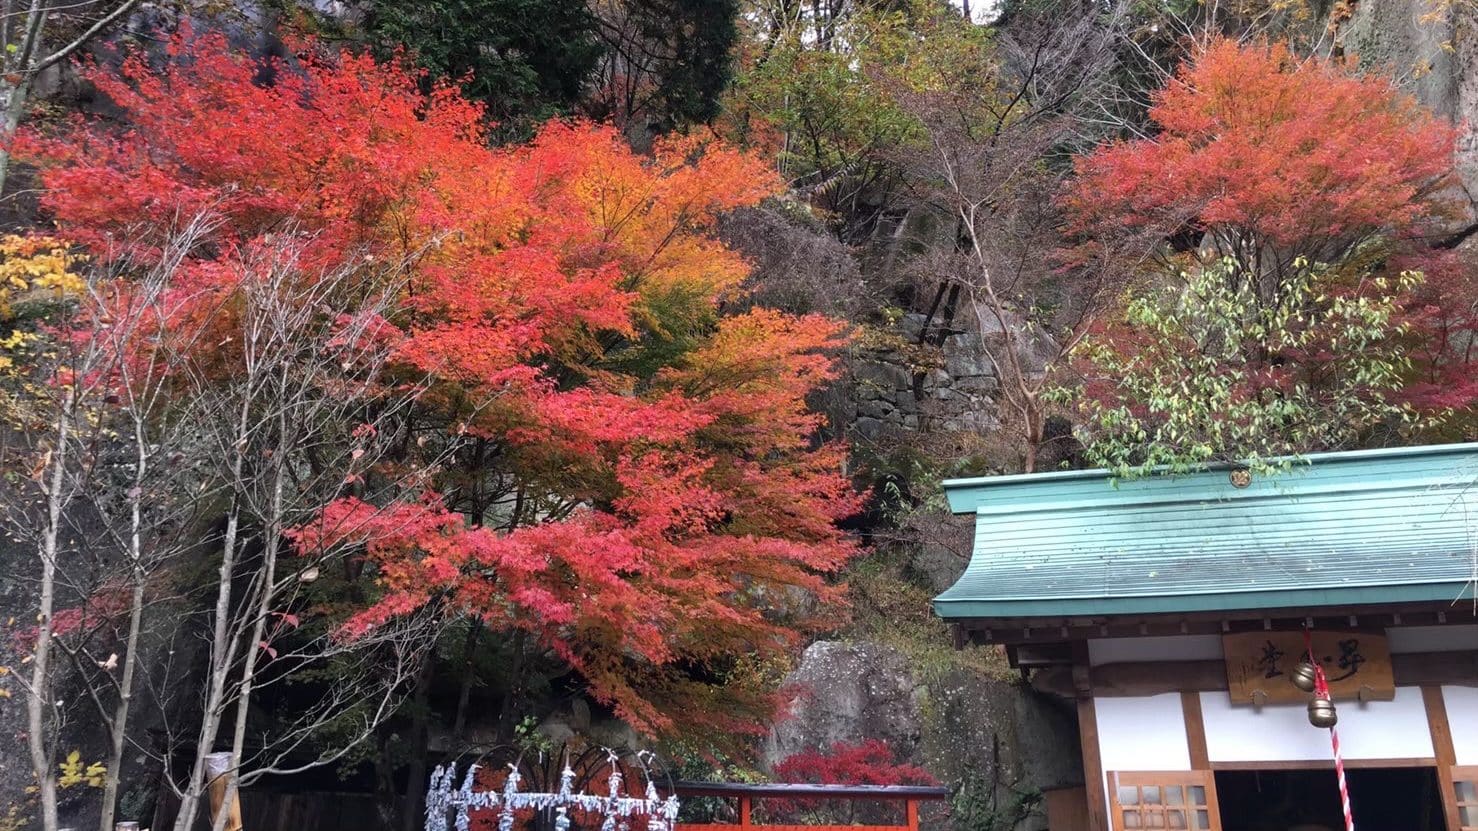 Japan's seasons and the autumn leaves